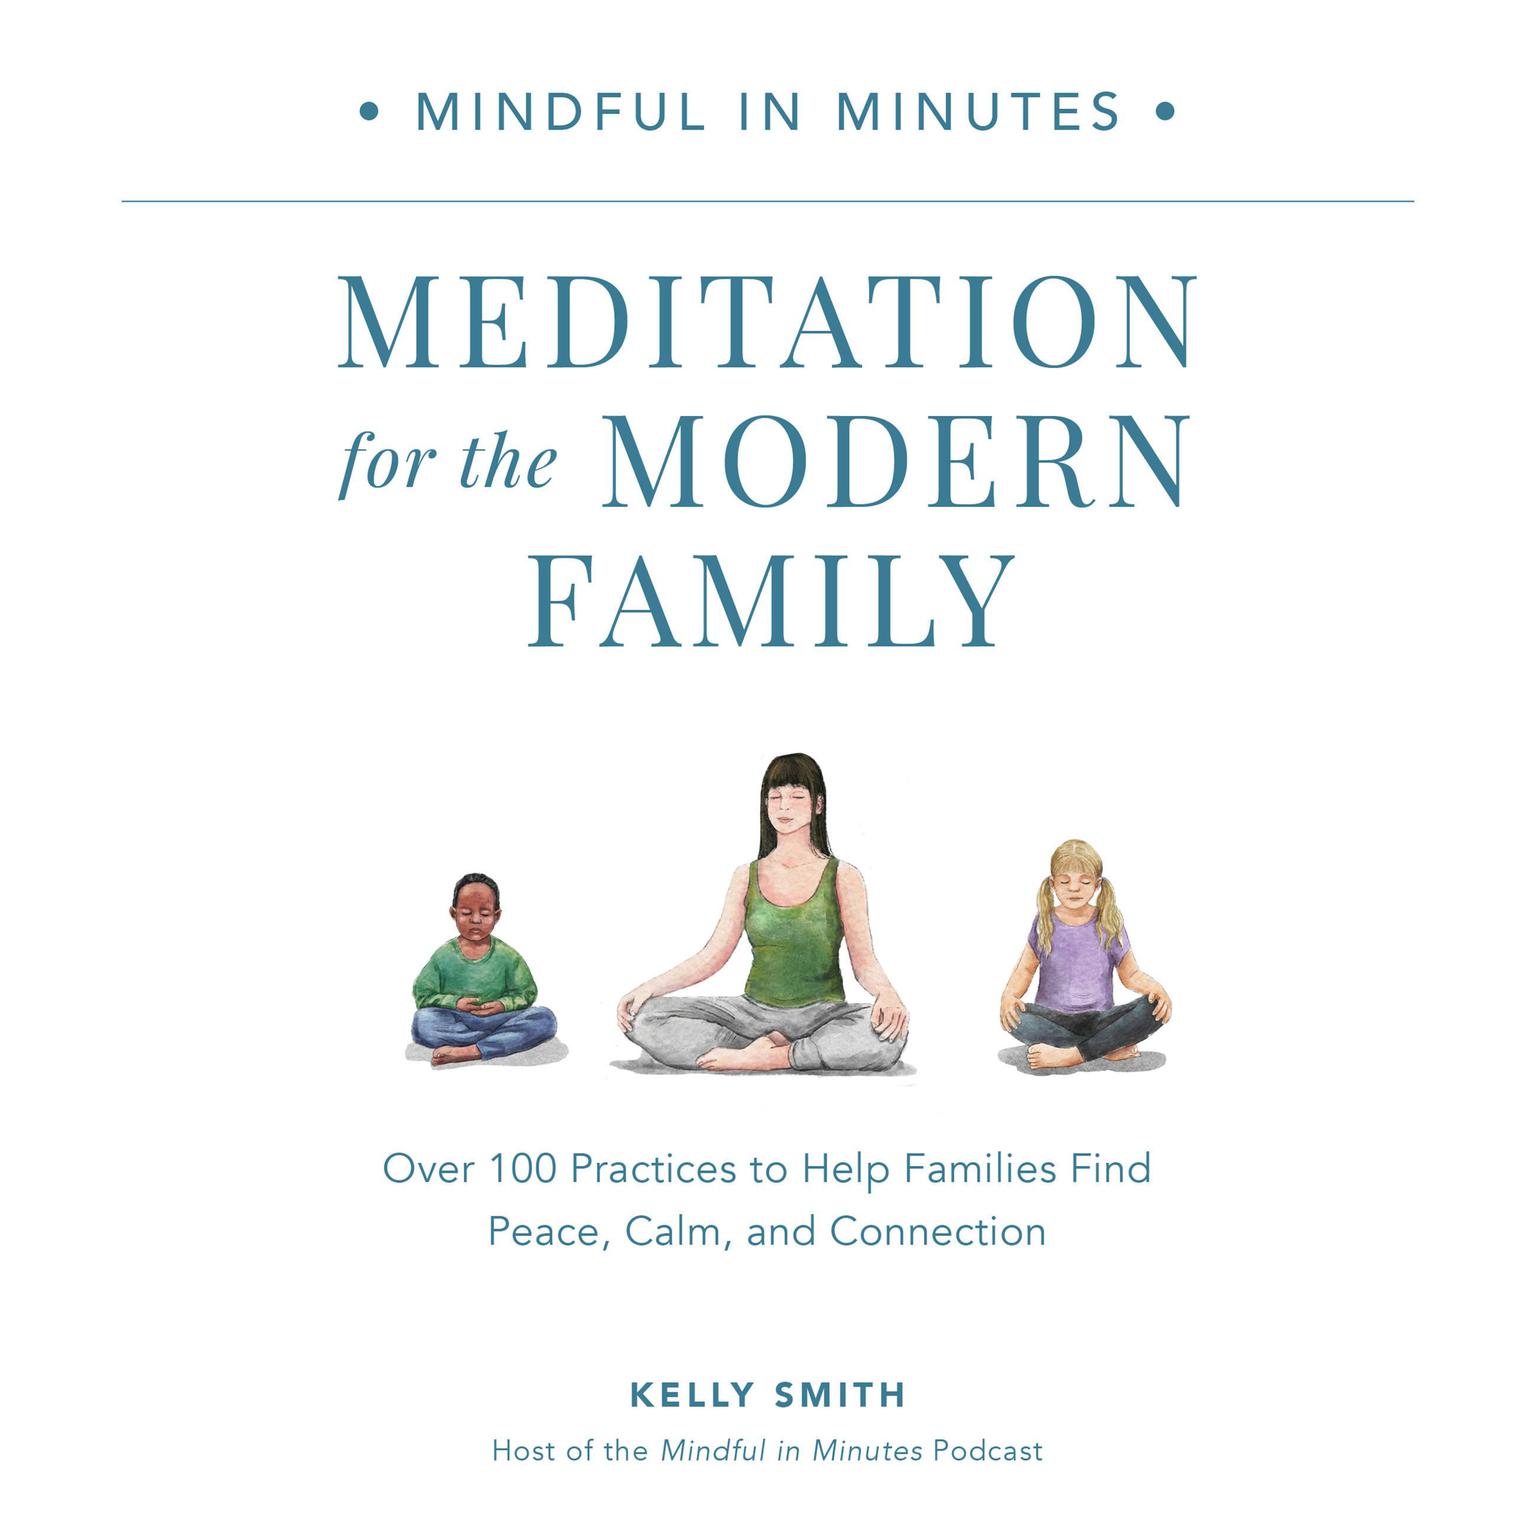 Mindful in Minutes: Meditation for the Modern Family: Over 100 Practices to Help Families Find Peace, Calm, and Connection Audiobook, by Kelly Smith